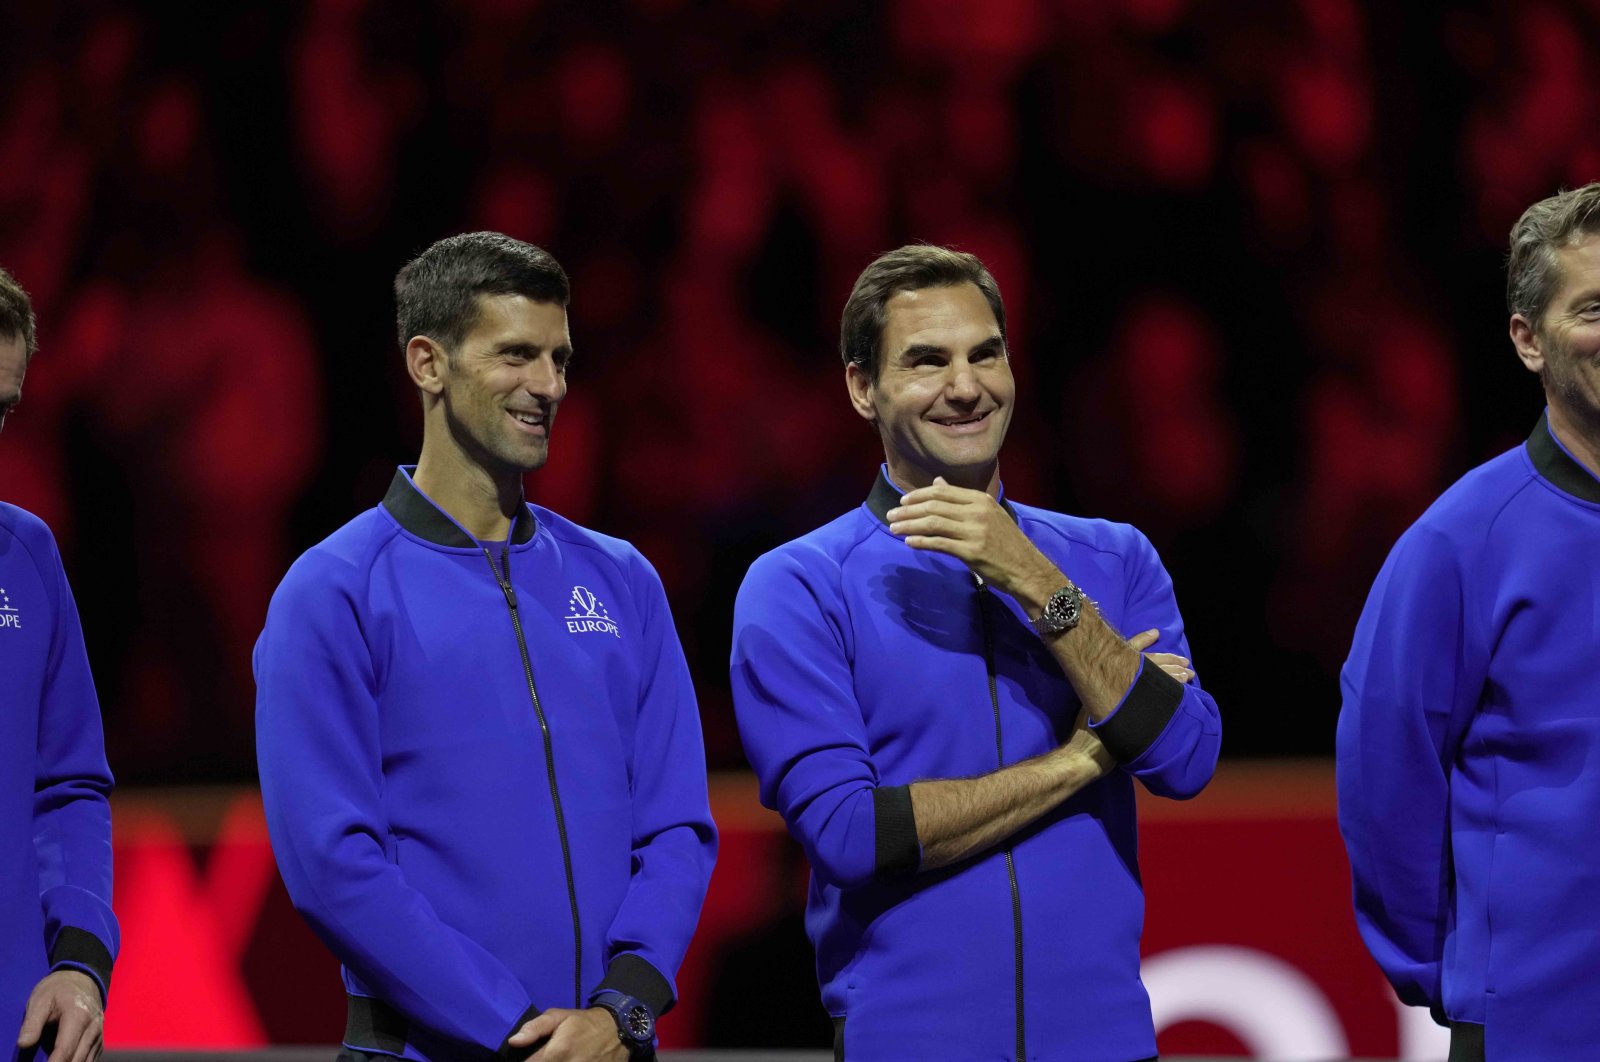 Team Europe&#039;s Novak Djokovic and Roger Federer stand side by side at the end of the Laver Cup tennis tournament in London, U.K., Sept. 25, 2022. (AP Photo